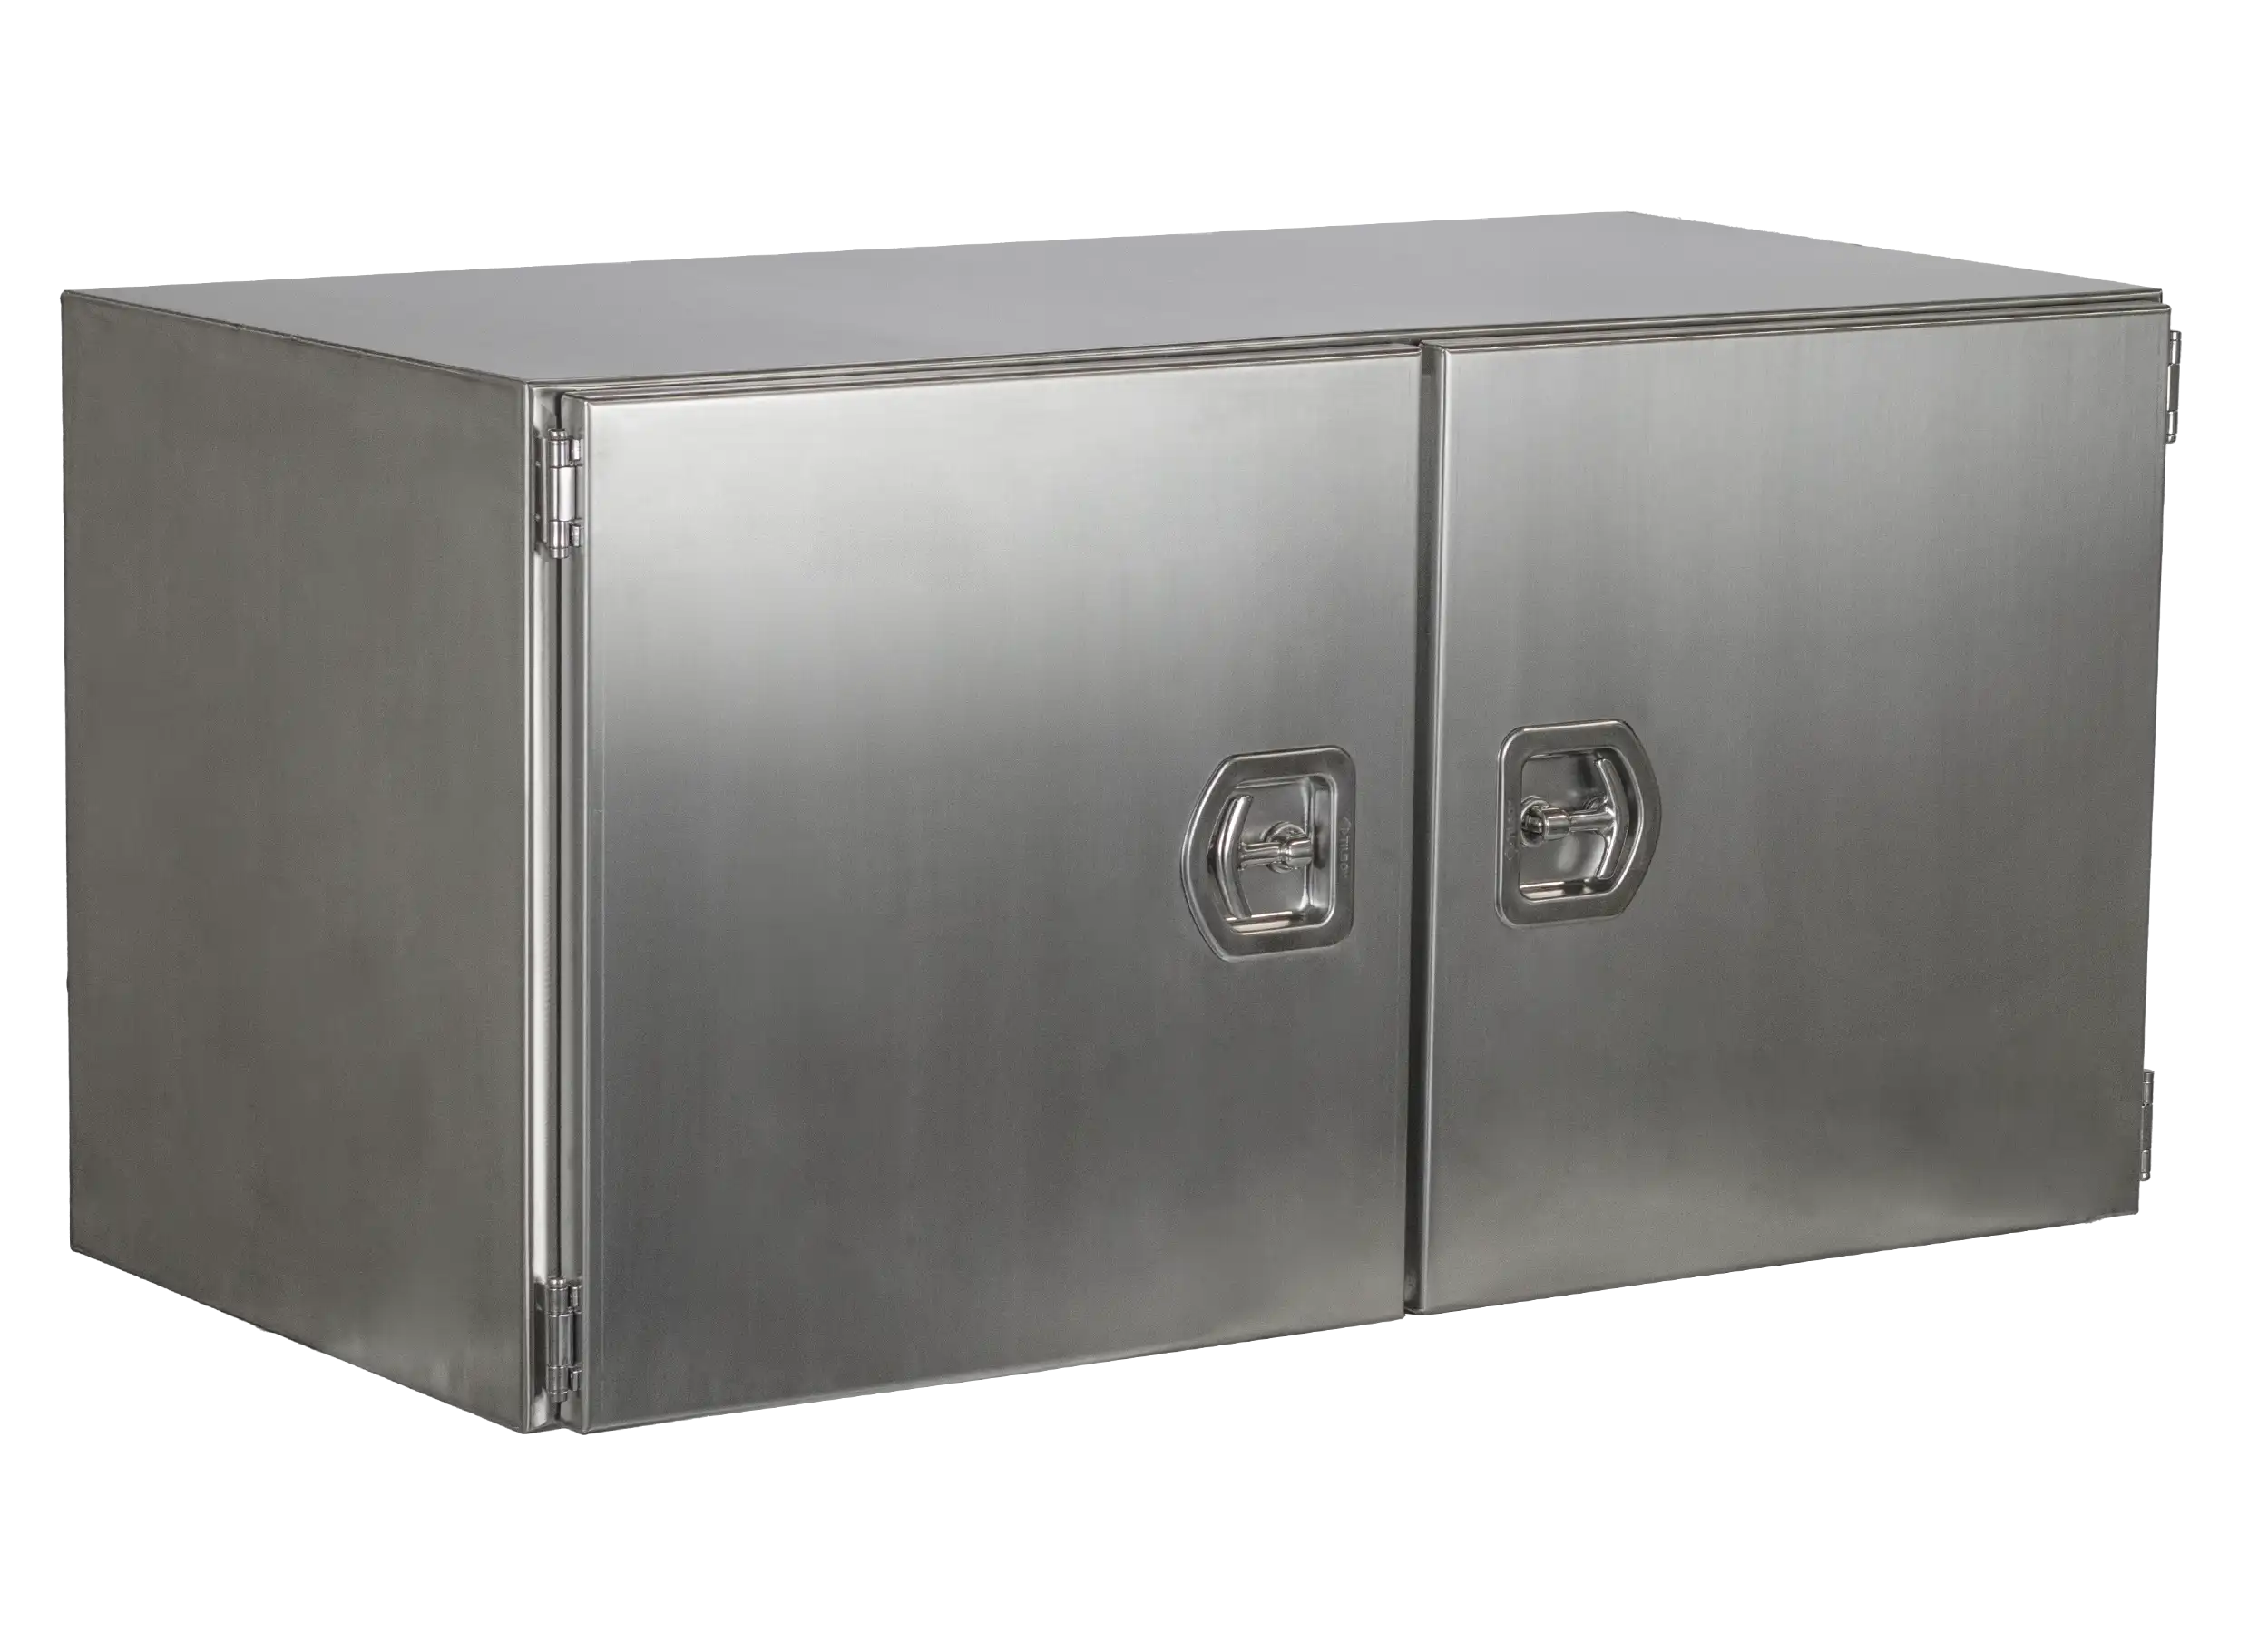 Toolbox - Stainless Steel - Double doors - 1200x600x600 mm